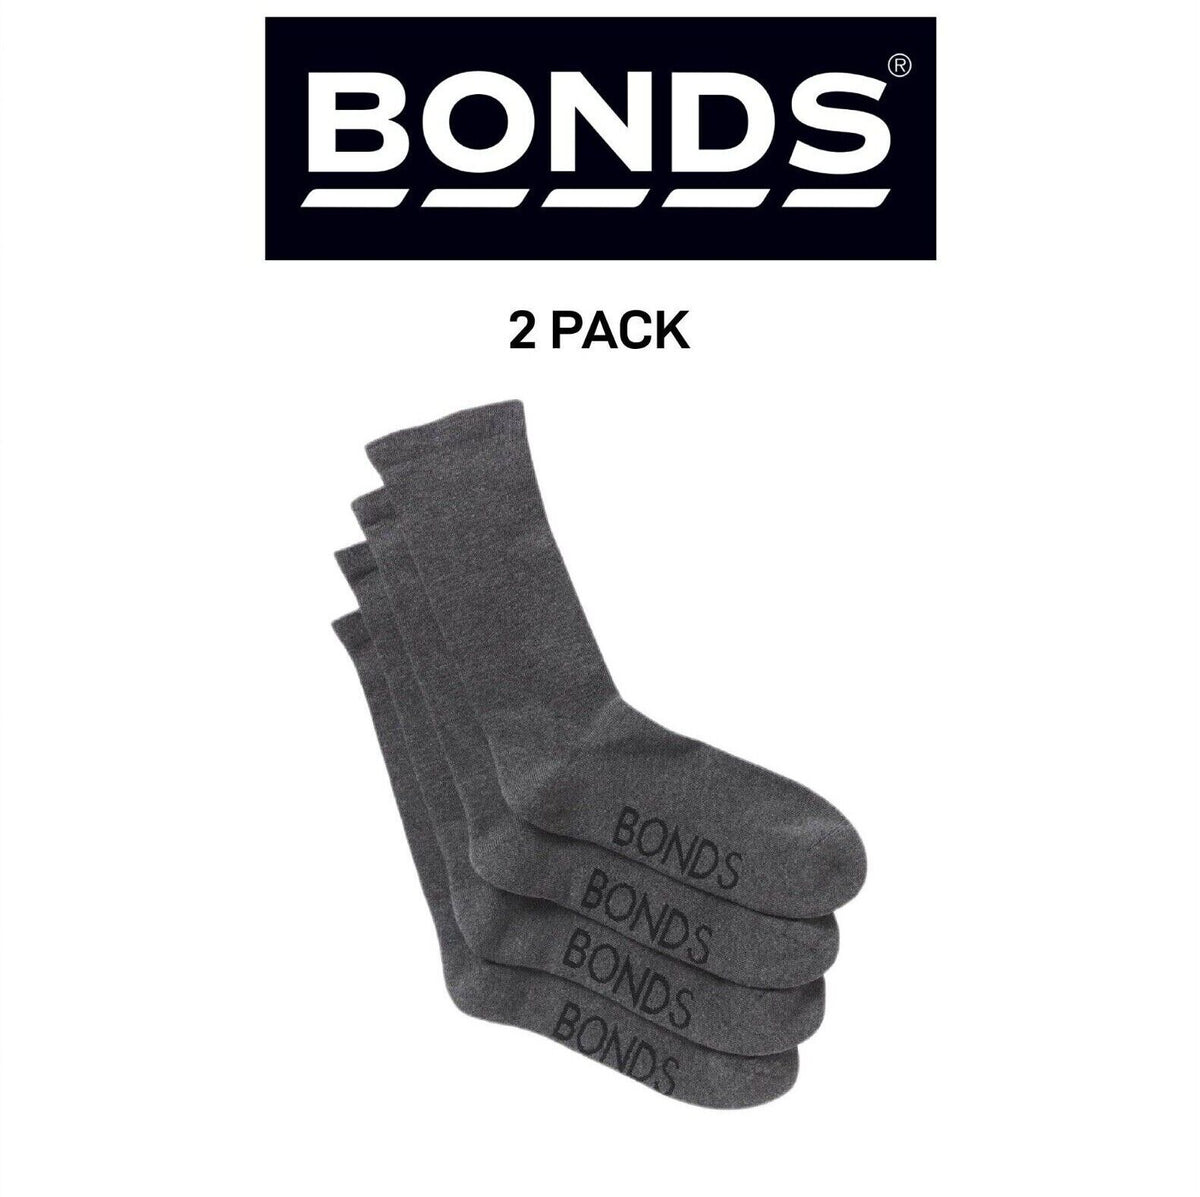 Bonds Mens Very Comfy Crew Socks Comfortable Cushioned Sole 2 Pack SZFP2N